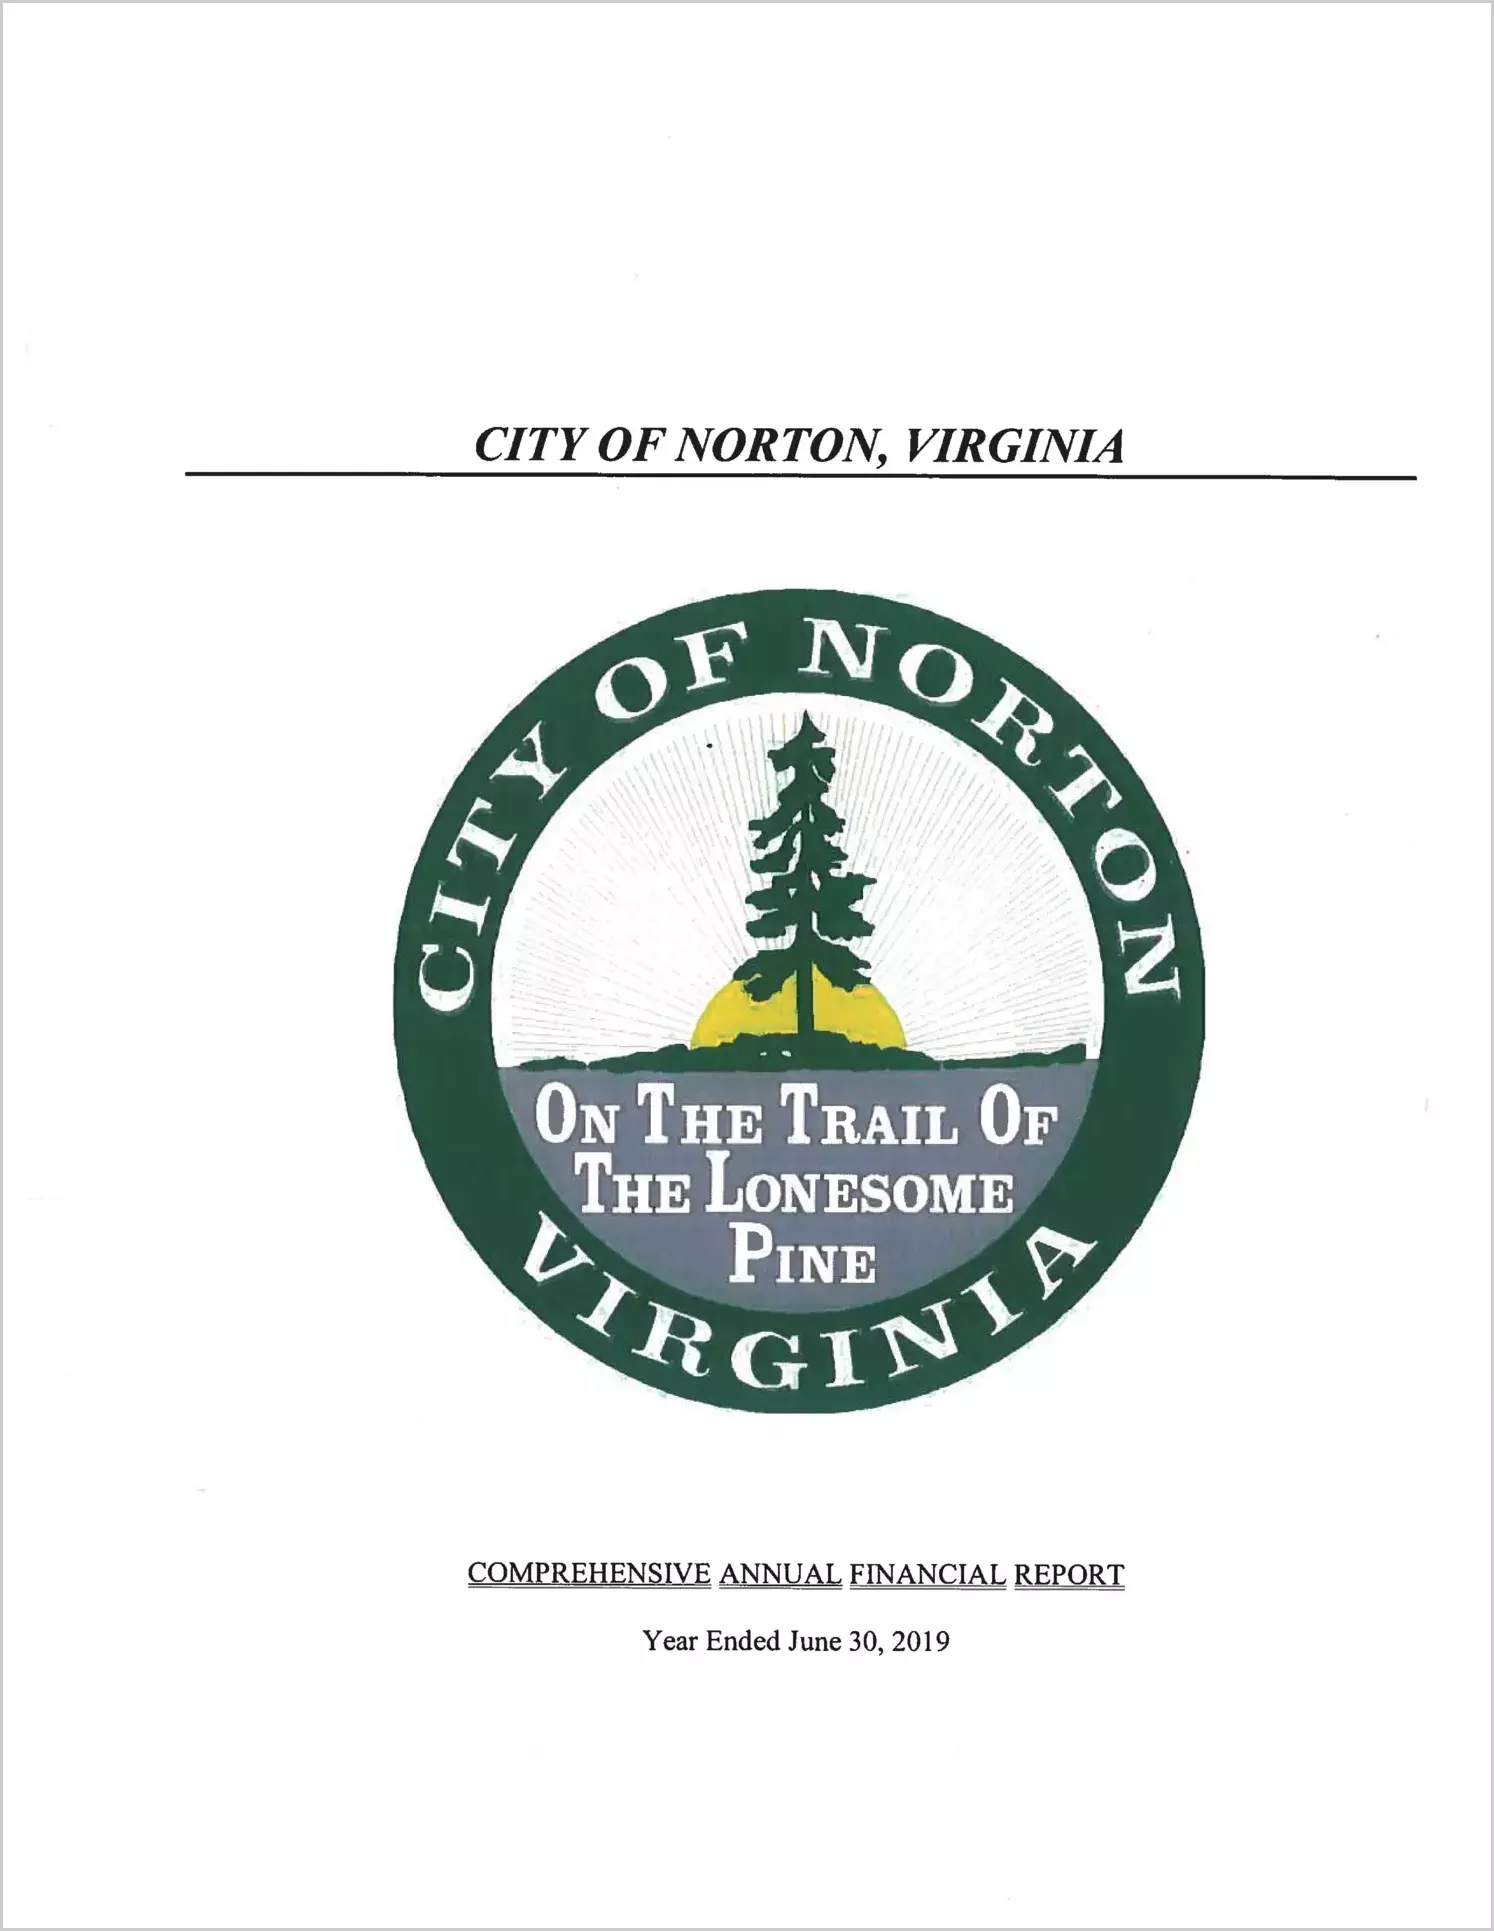 2019 Annual Financial Report for City of Norton